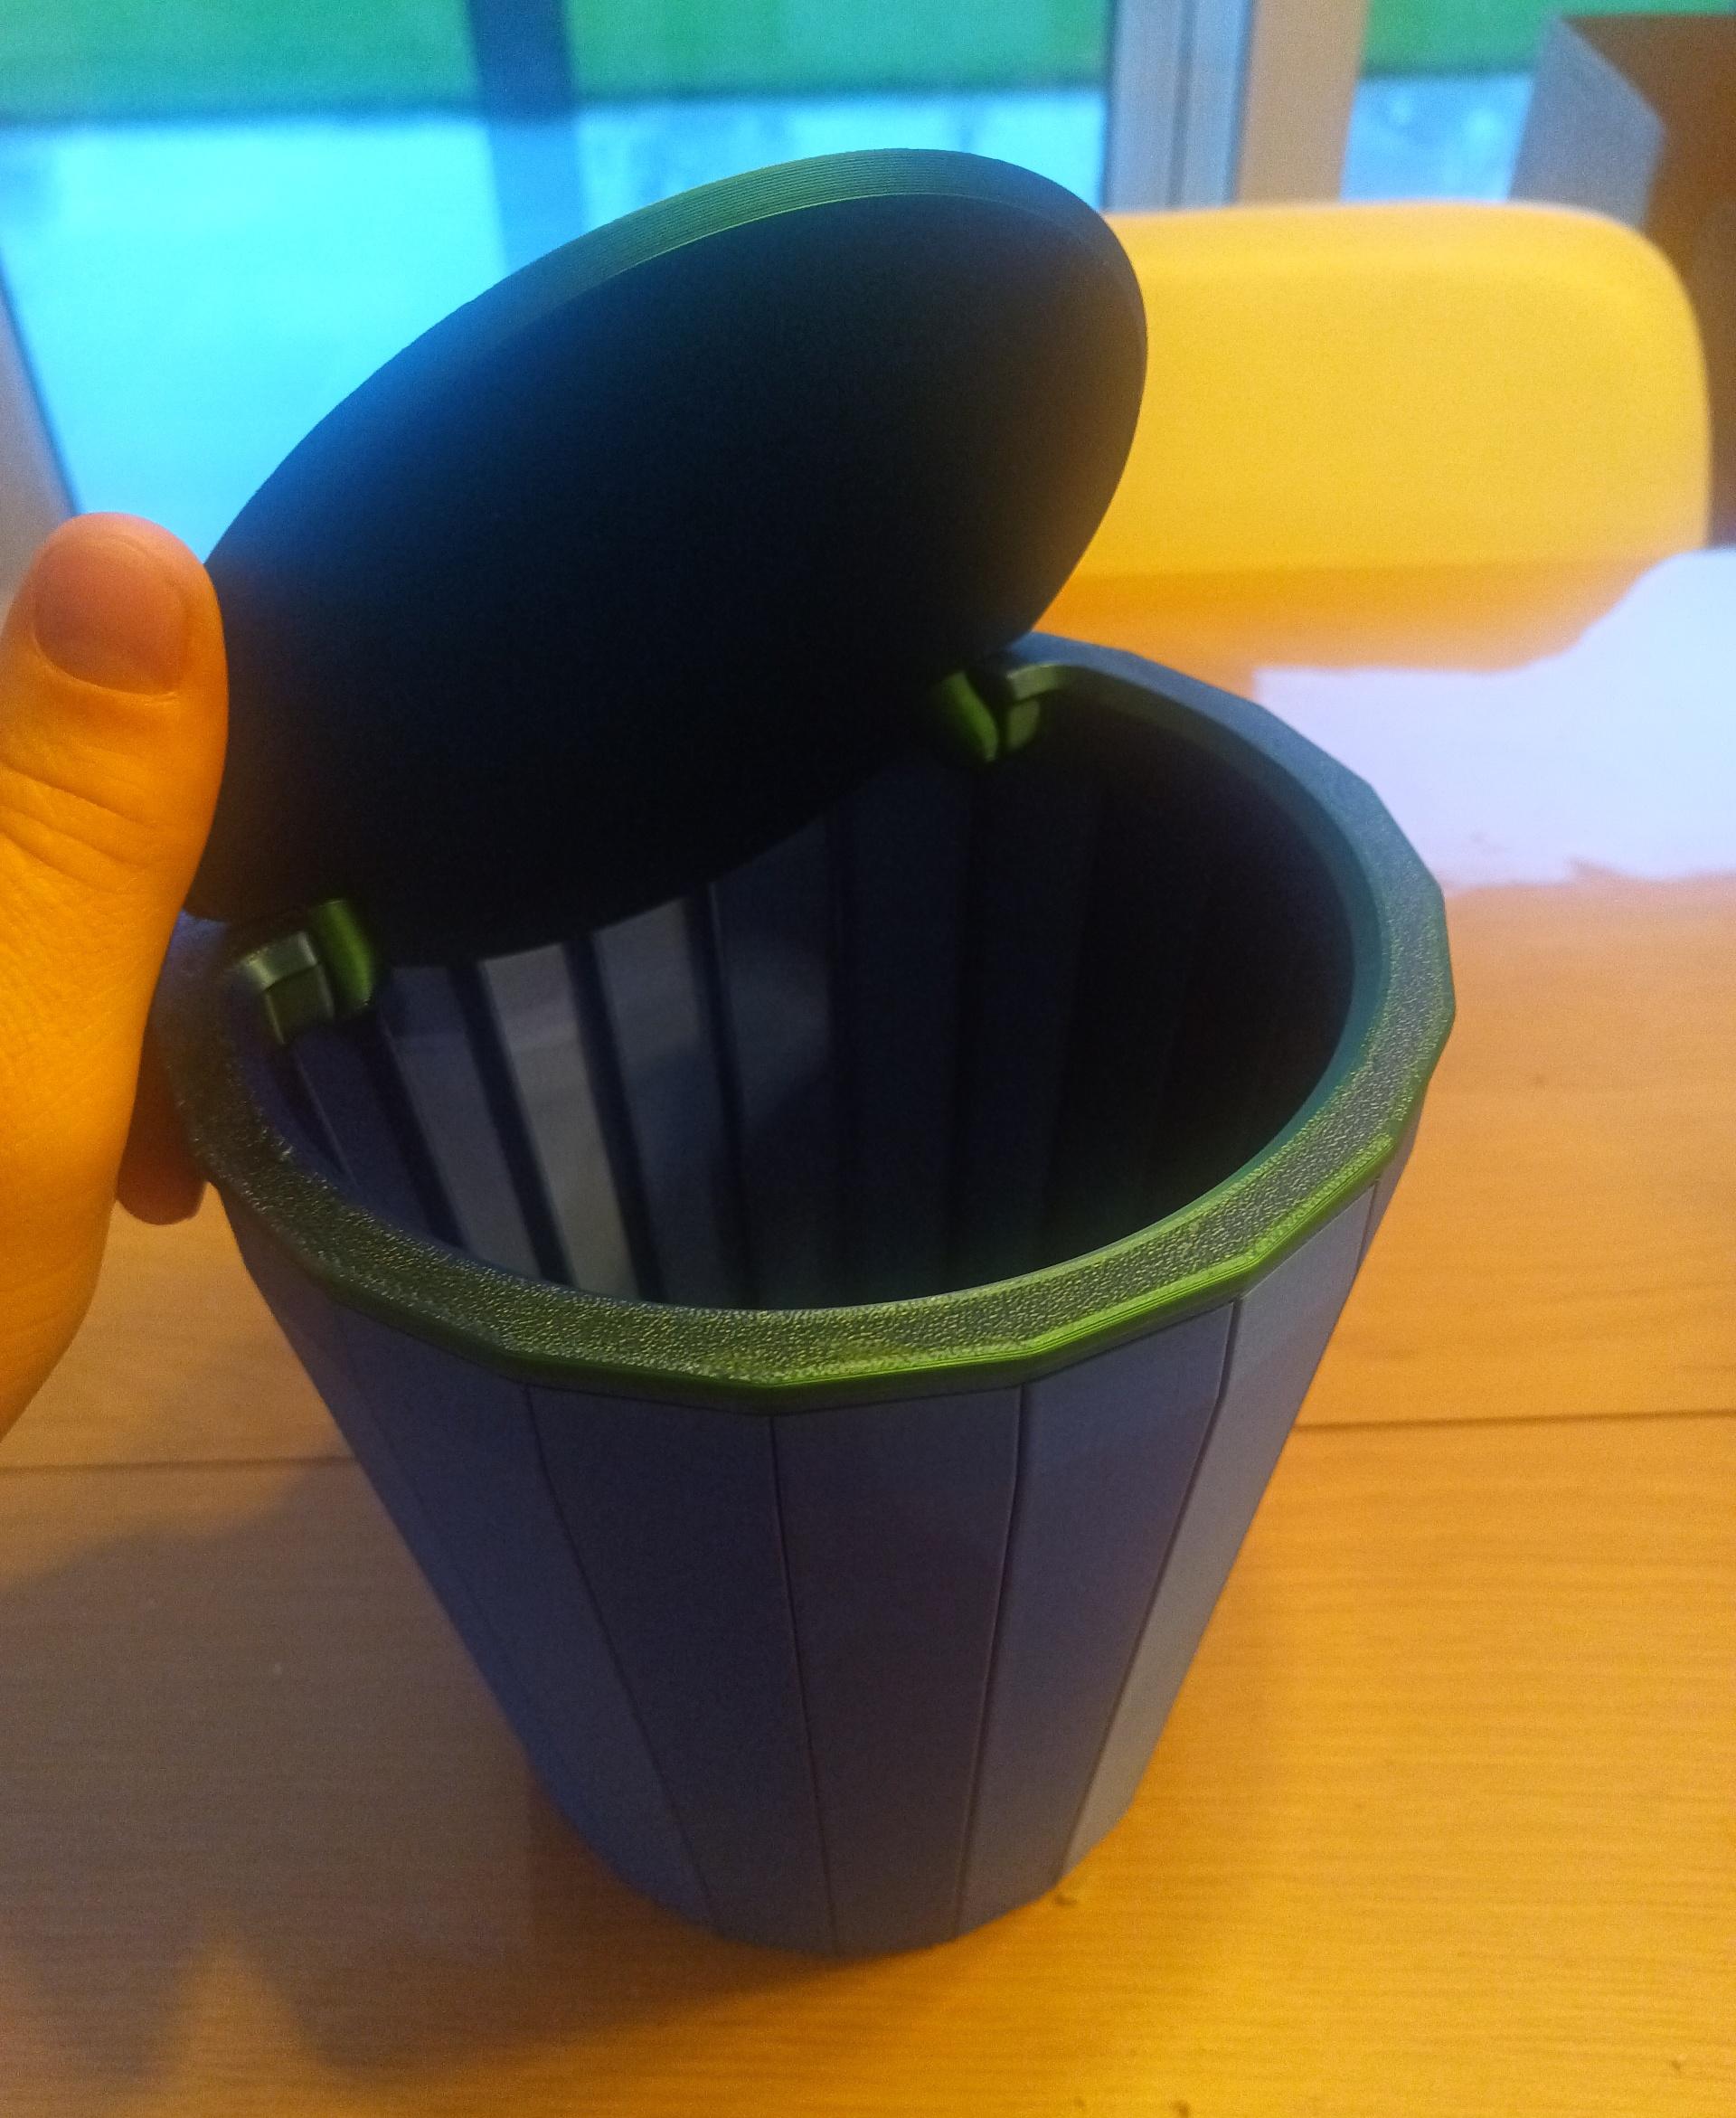 PLEIADES Round Waste Bin - My first print on my new bambu x1C. Very easy to print,when following the instructions. Even my wife said that she though it was Nice, the first time she said that about a print. was it because of the printer of because of the model? - 3d model